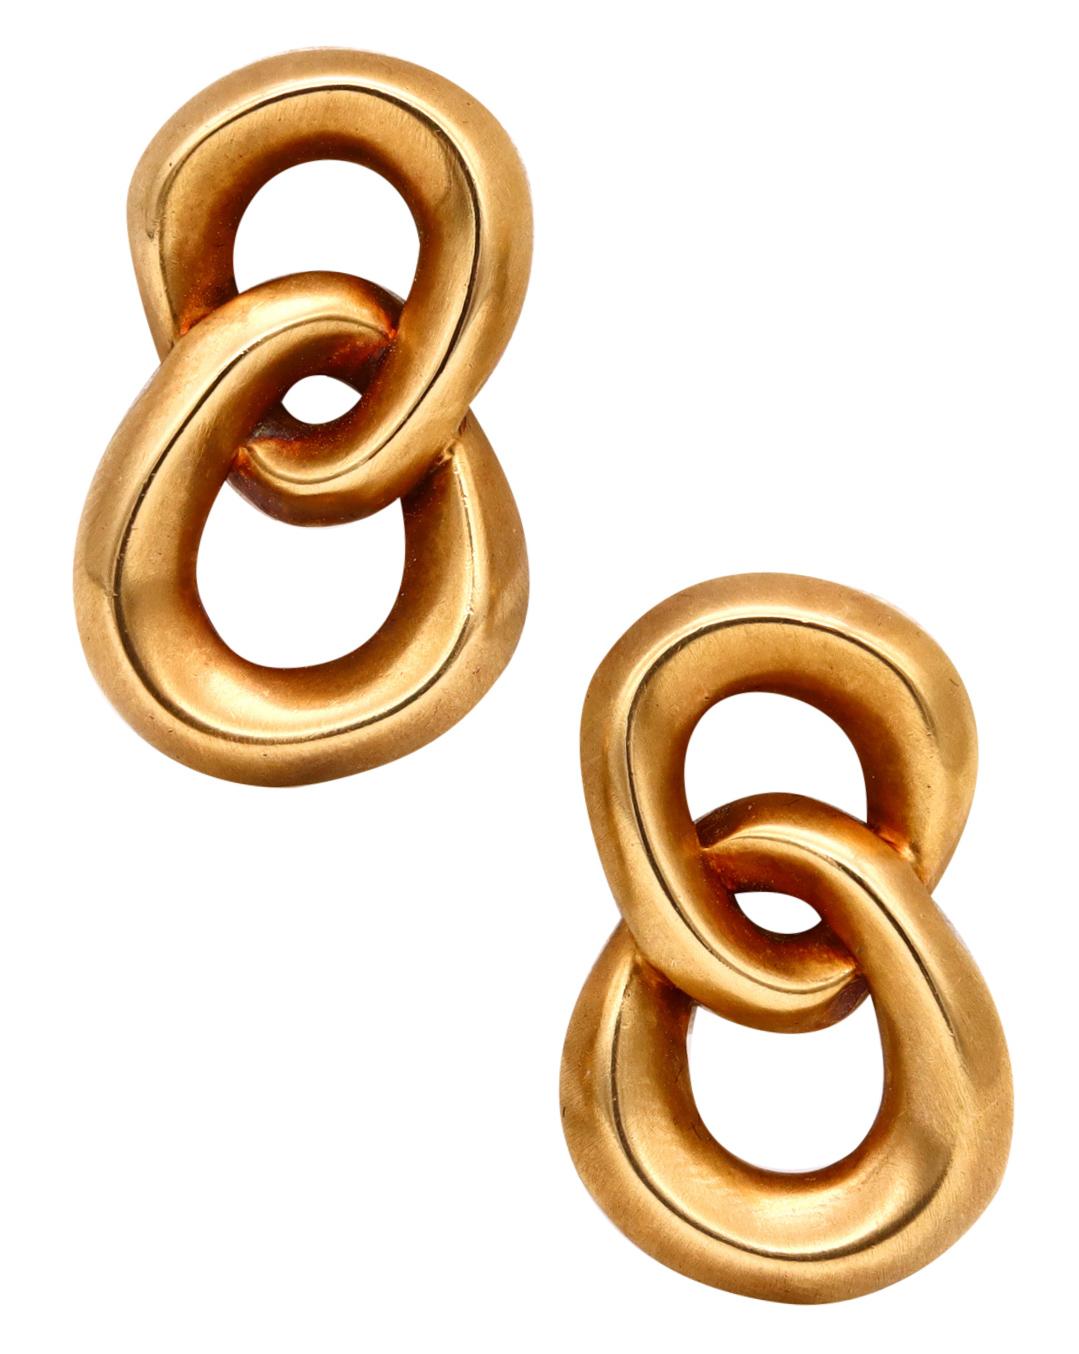 Angela Cummings 1986 New York Studios Double Circled Earrings in Solid 18Kt Gold